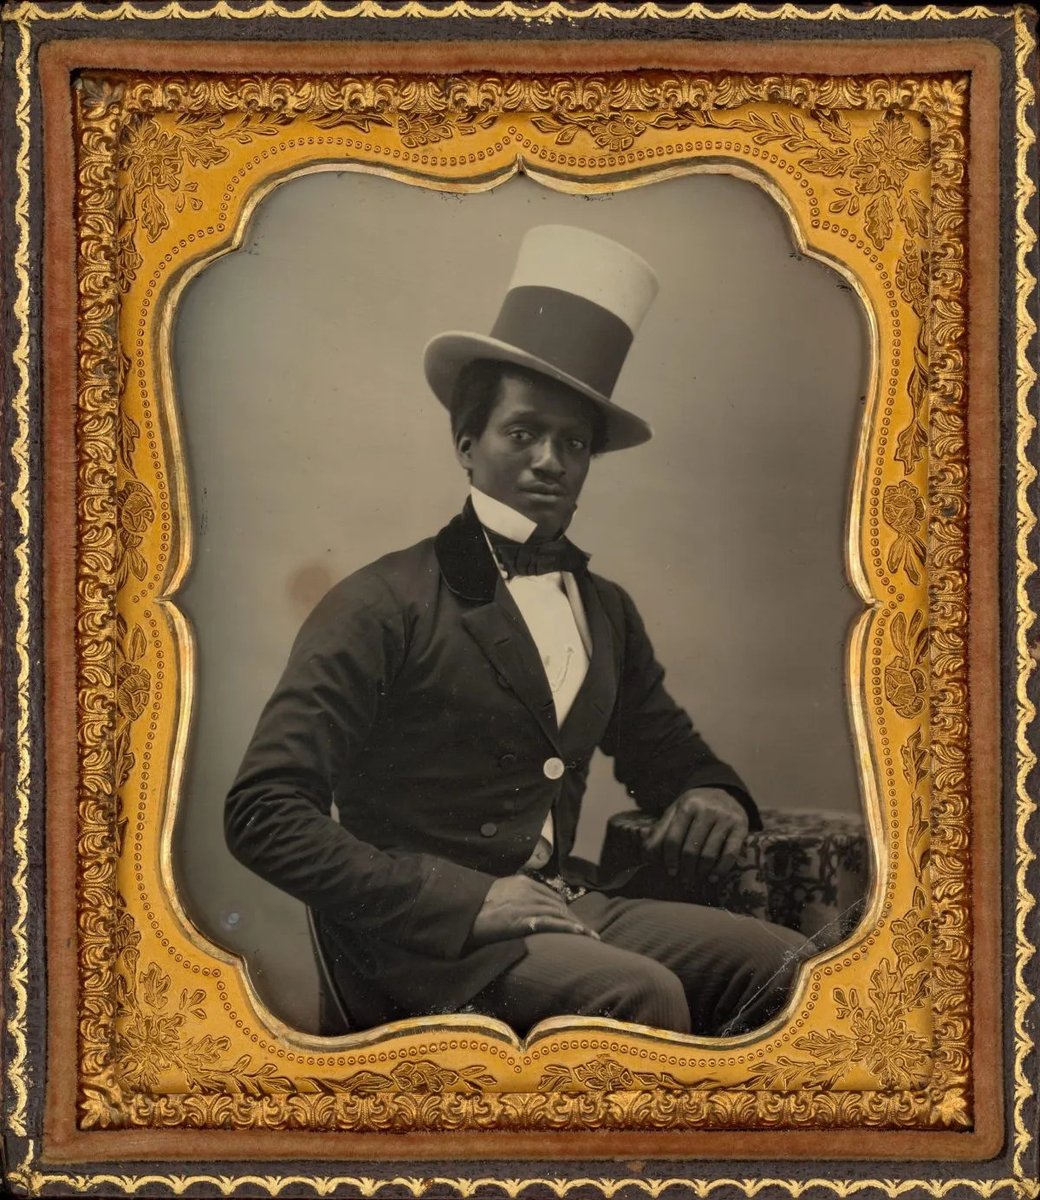 This is a circa 1855 daguerreotype of an unidentified African American gentleman. The glass plate is encased in a gilt and velvet-lined case, which was the most popular form of adorning and protecting these keepsakes. He wears a light-colored stovepipe hat tilted at a jaunty